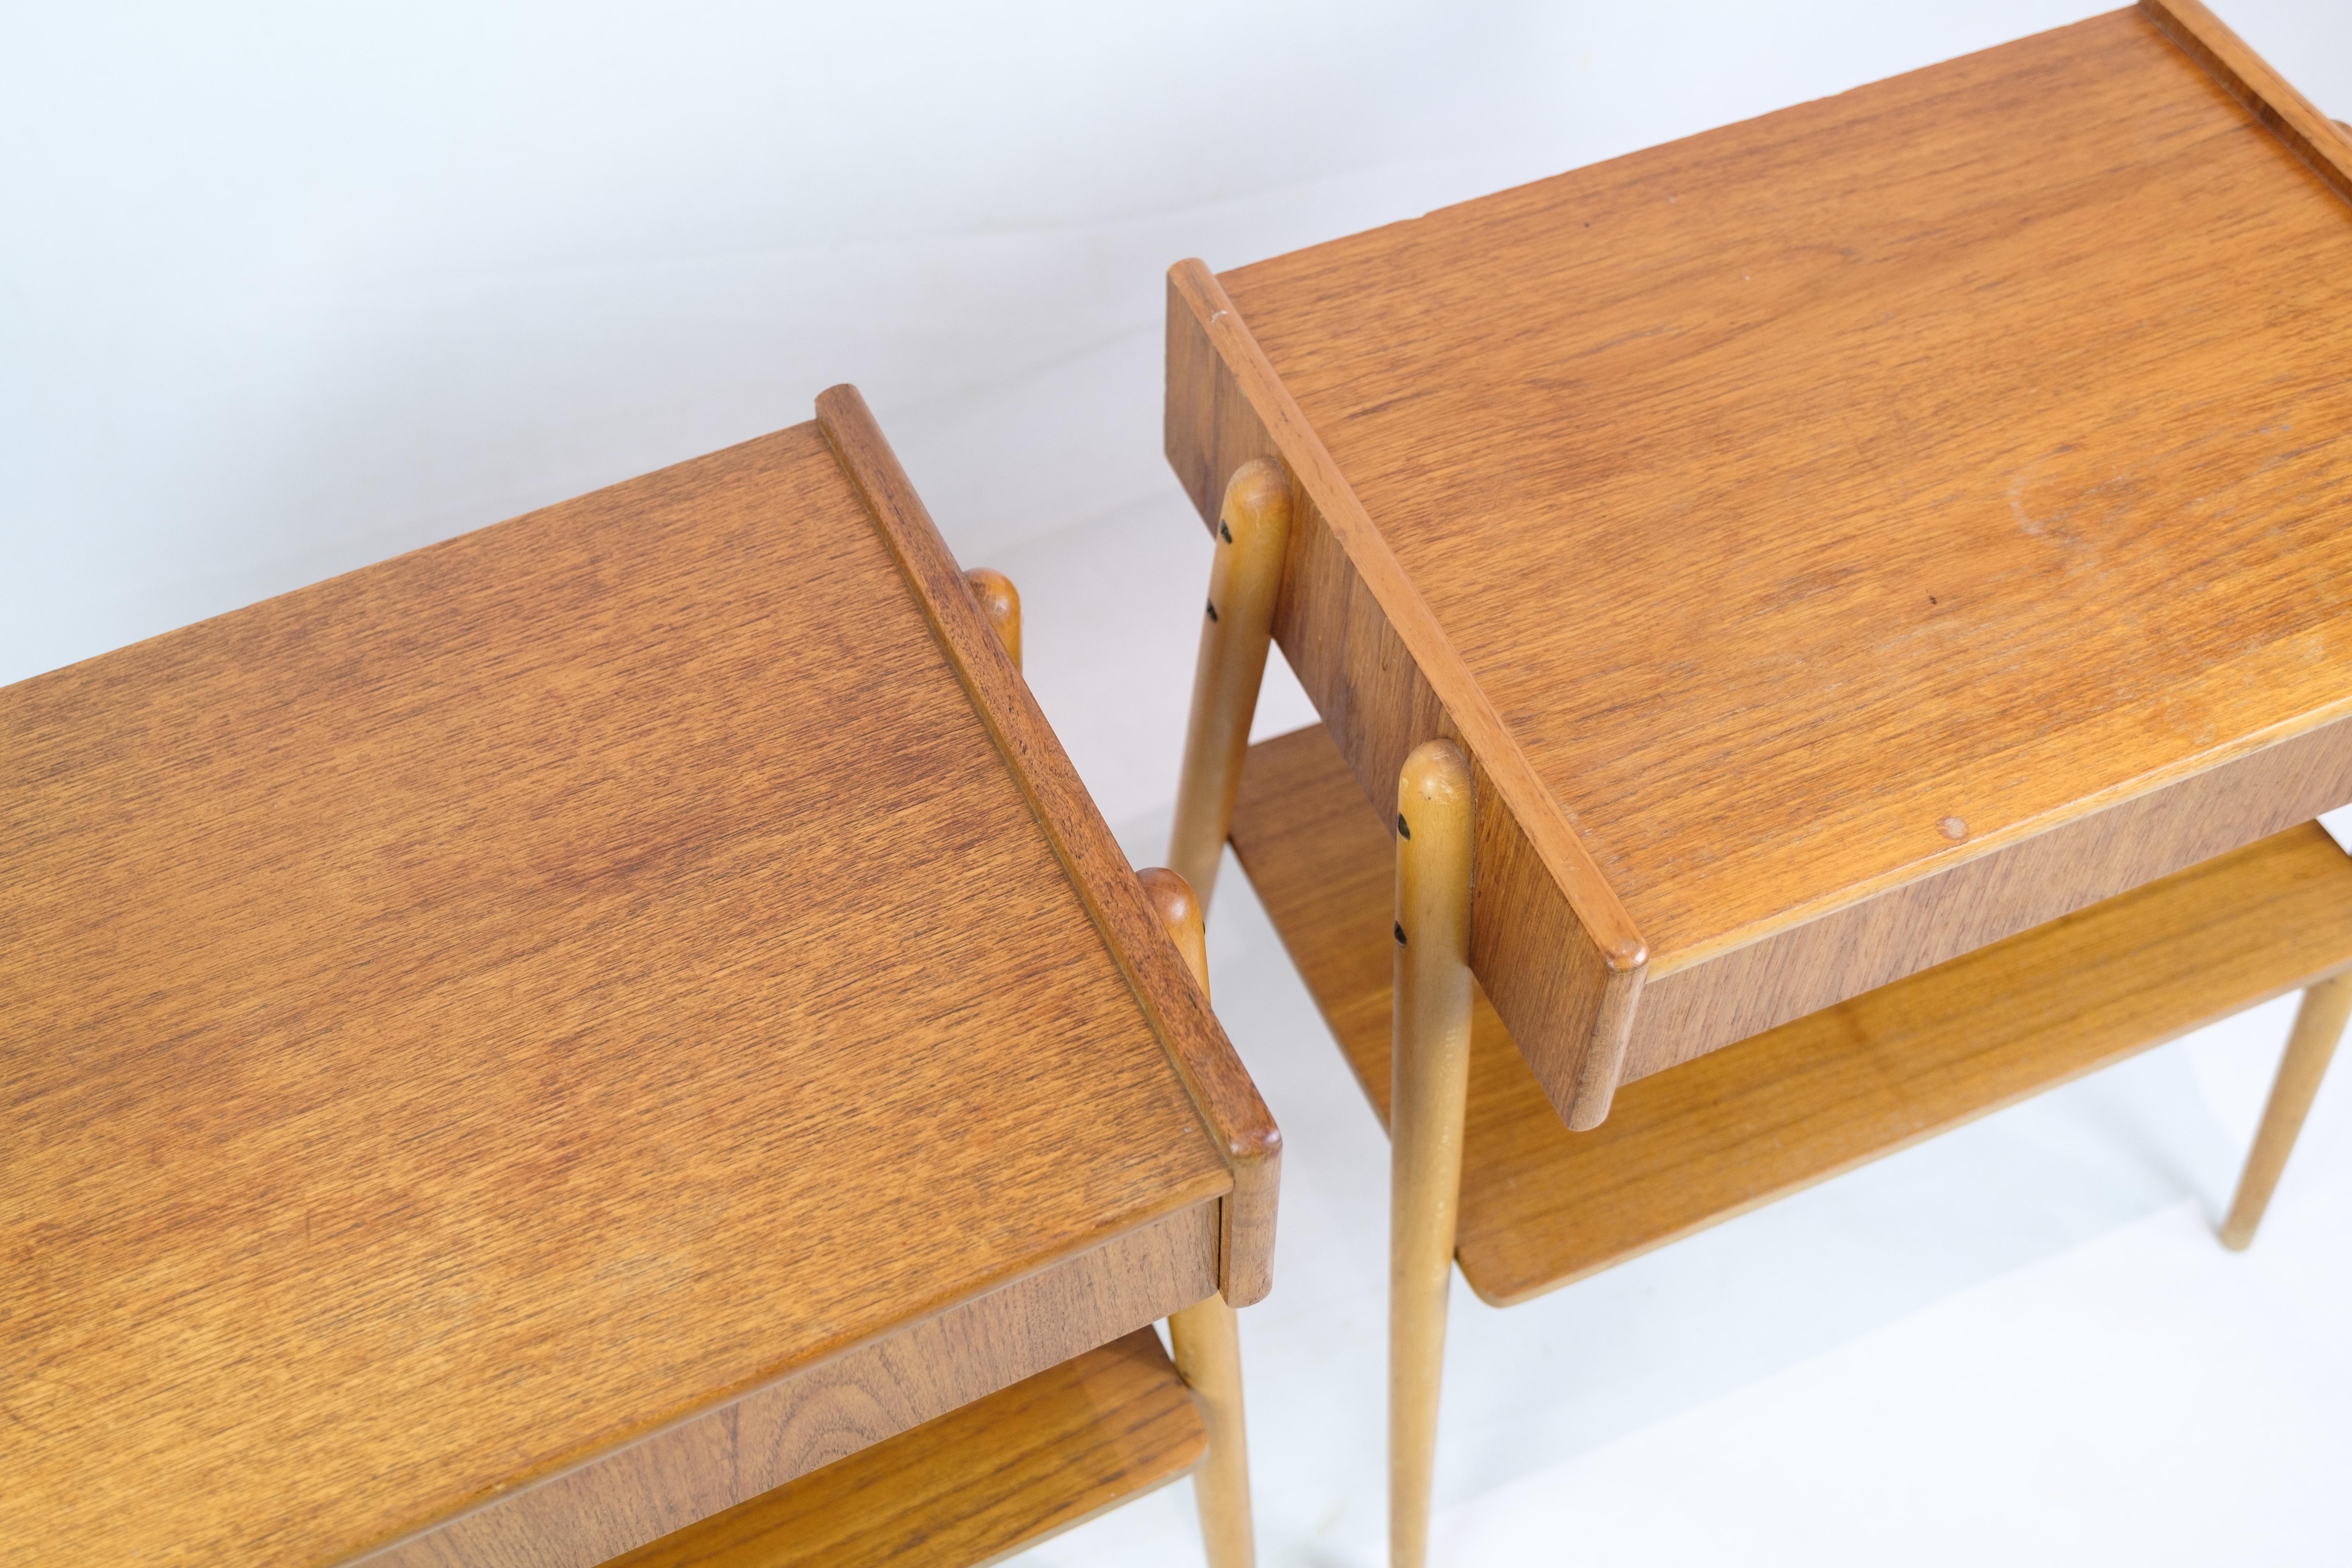 Mid-Century Modern Set of Nightstands In Teak, By AB Carlström & Co Furniture Factory From 1950s For Sale